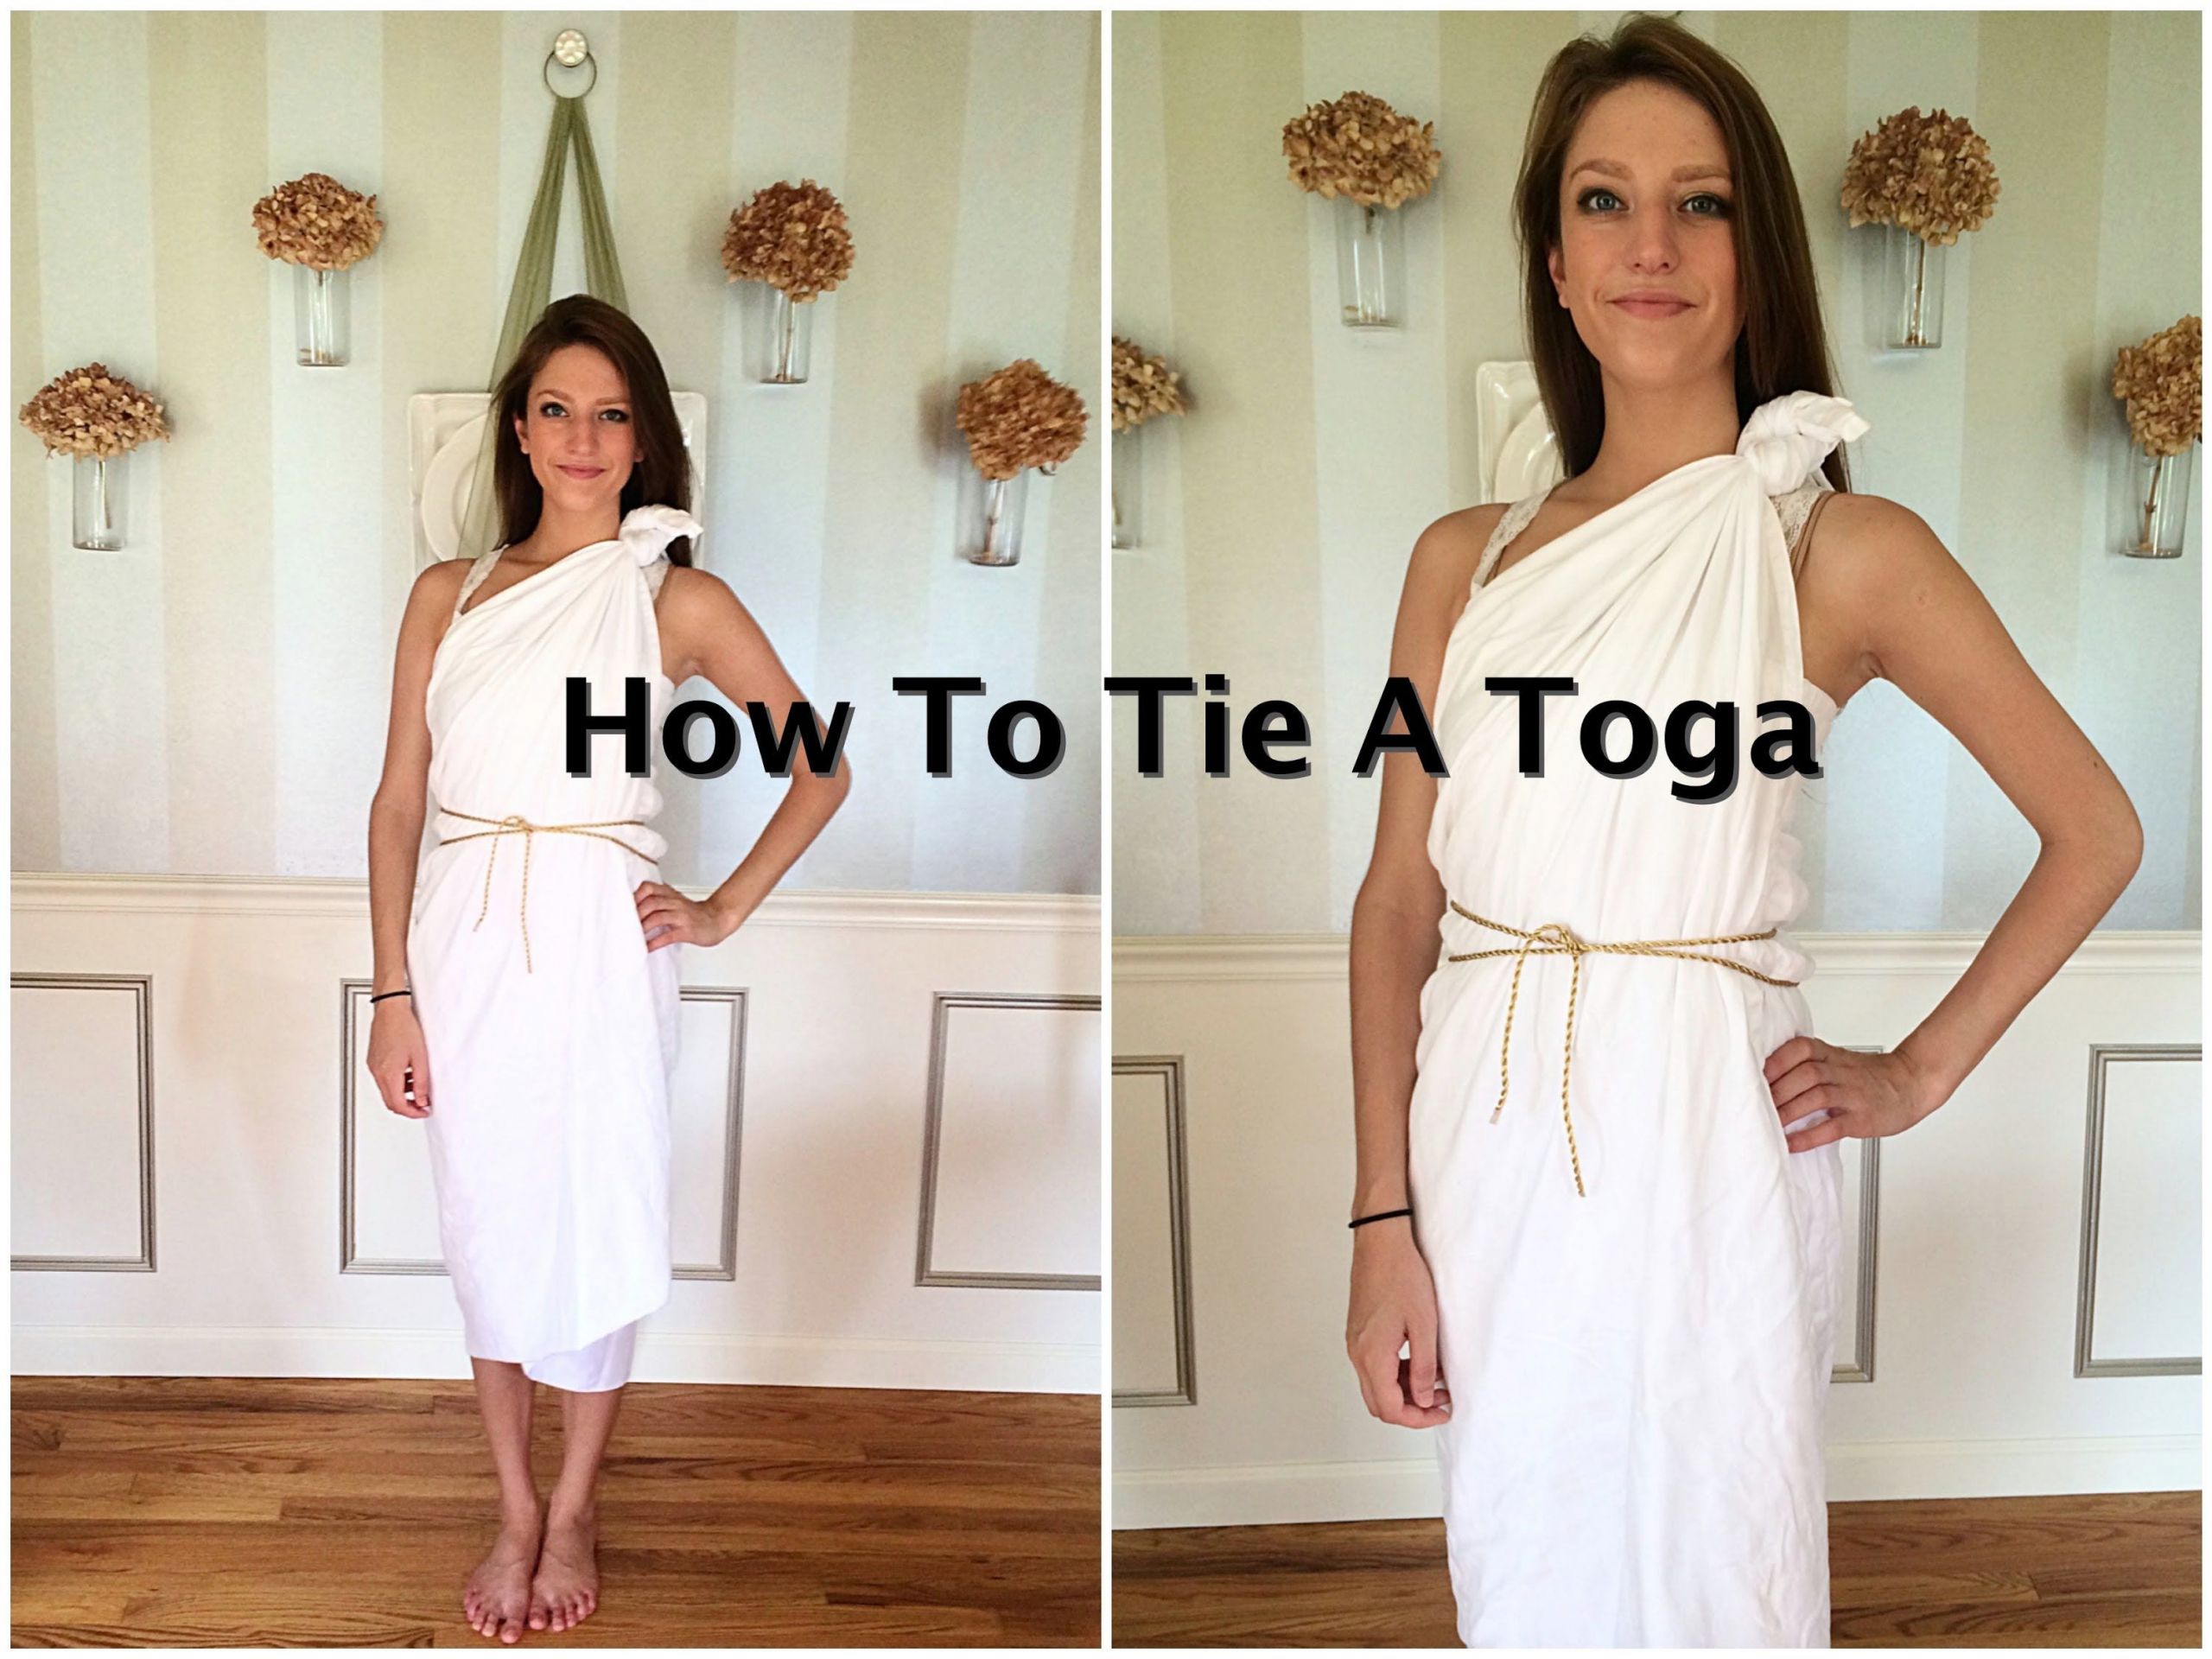 DIY Toga Costumes
 How To Tie A Toga Tutorial